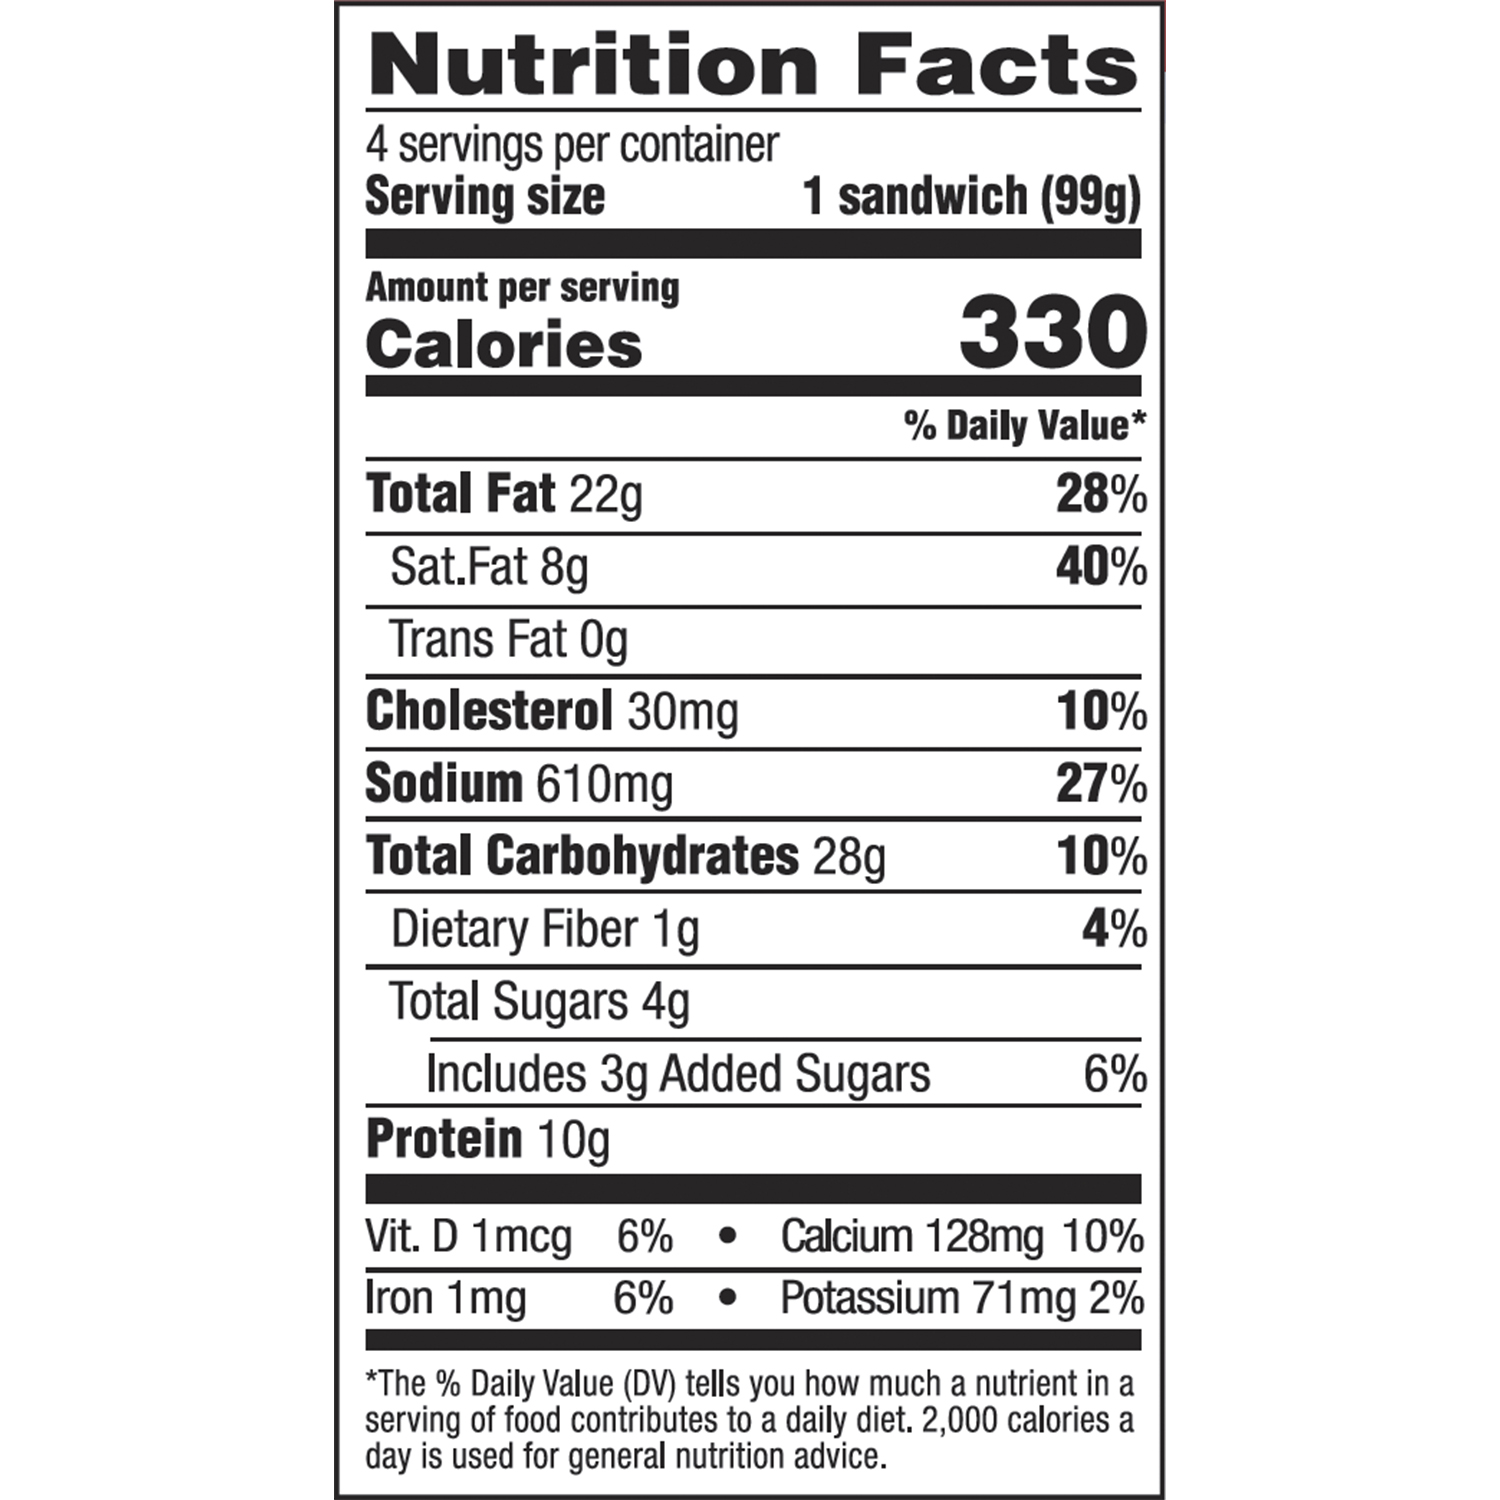 Nutrition Facts for Swaggerty's Sausage and Cheese Croissant